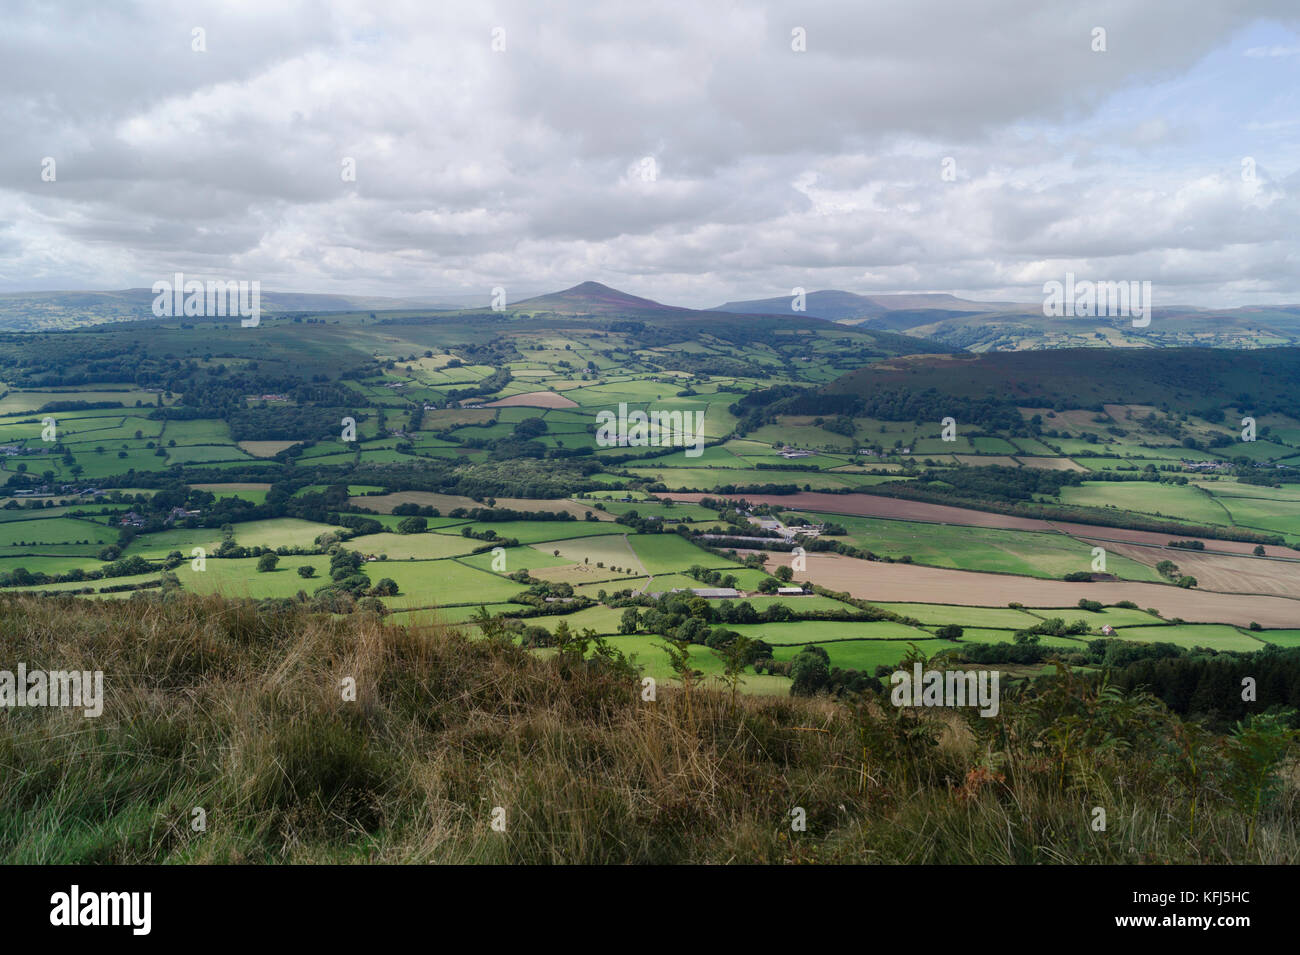 View of Sugar Loaf seen from Ysgyryd Fawr on the Eastern edge of the Brecon Beacons. Stock Photo